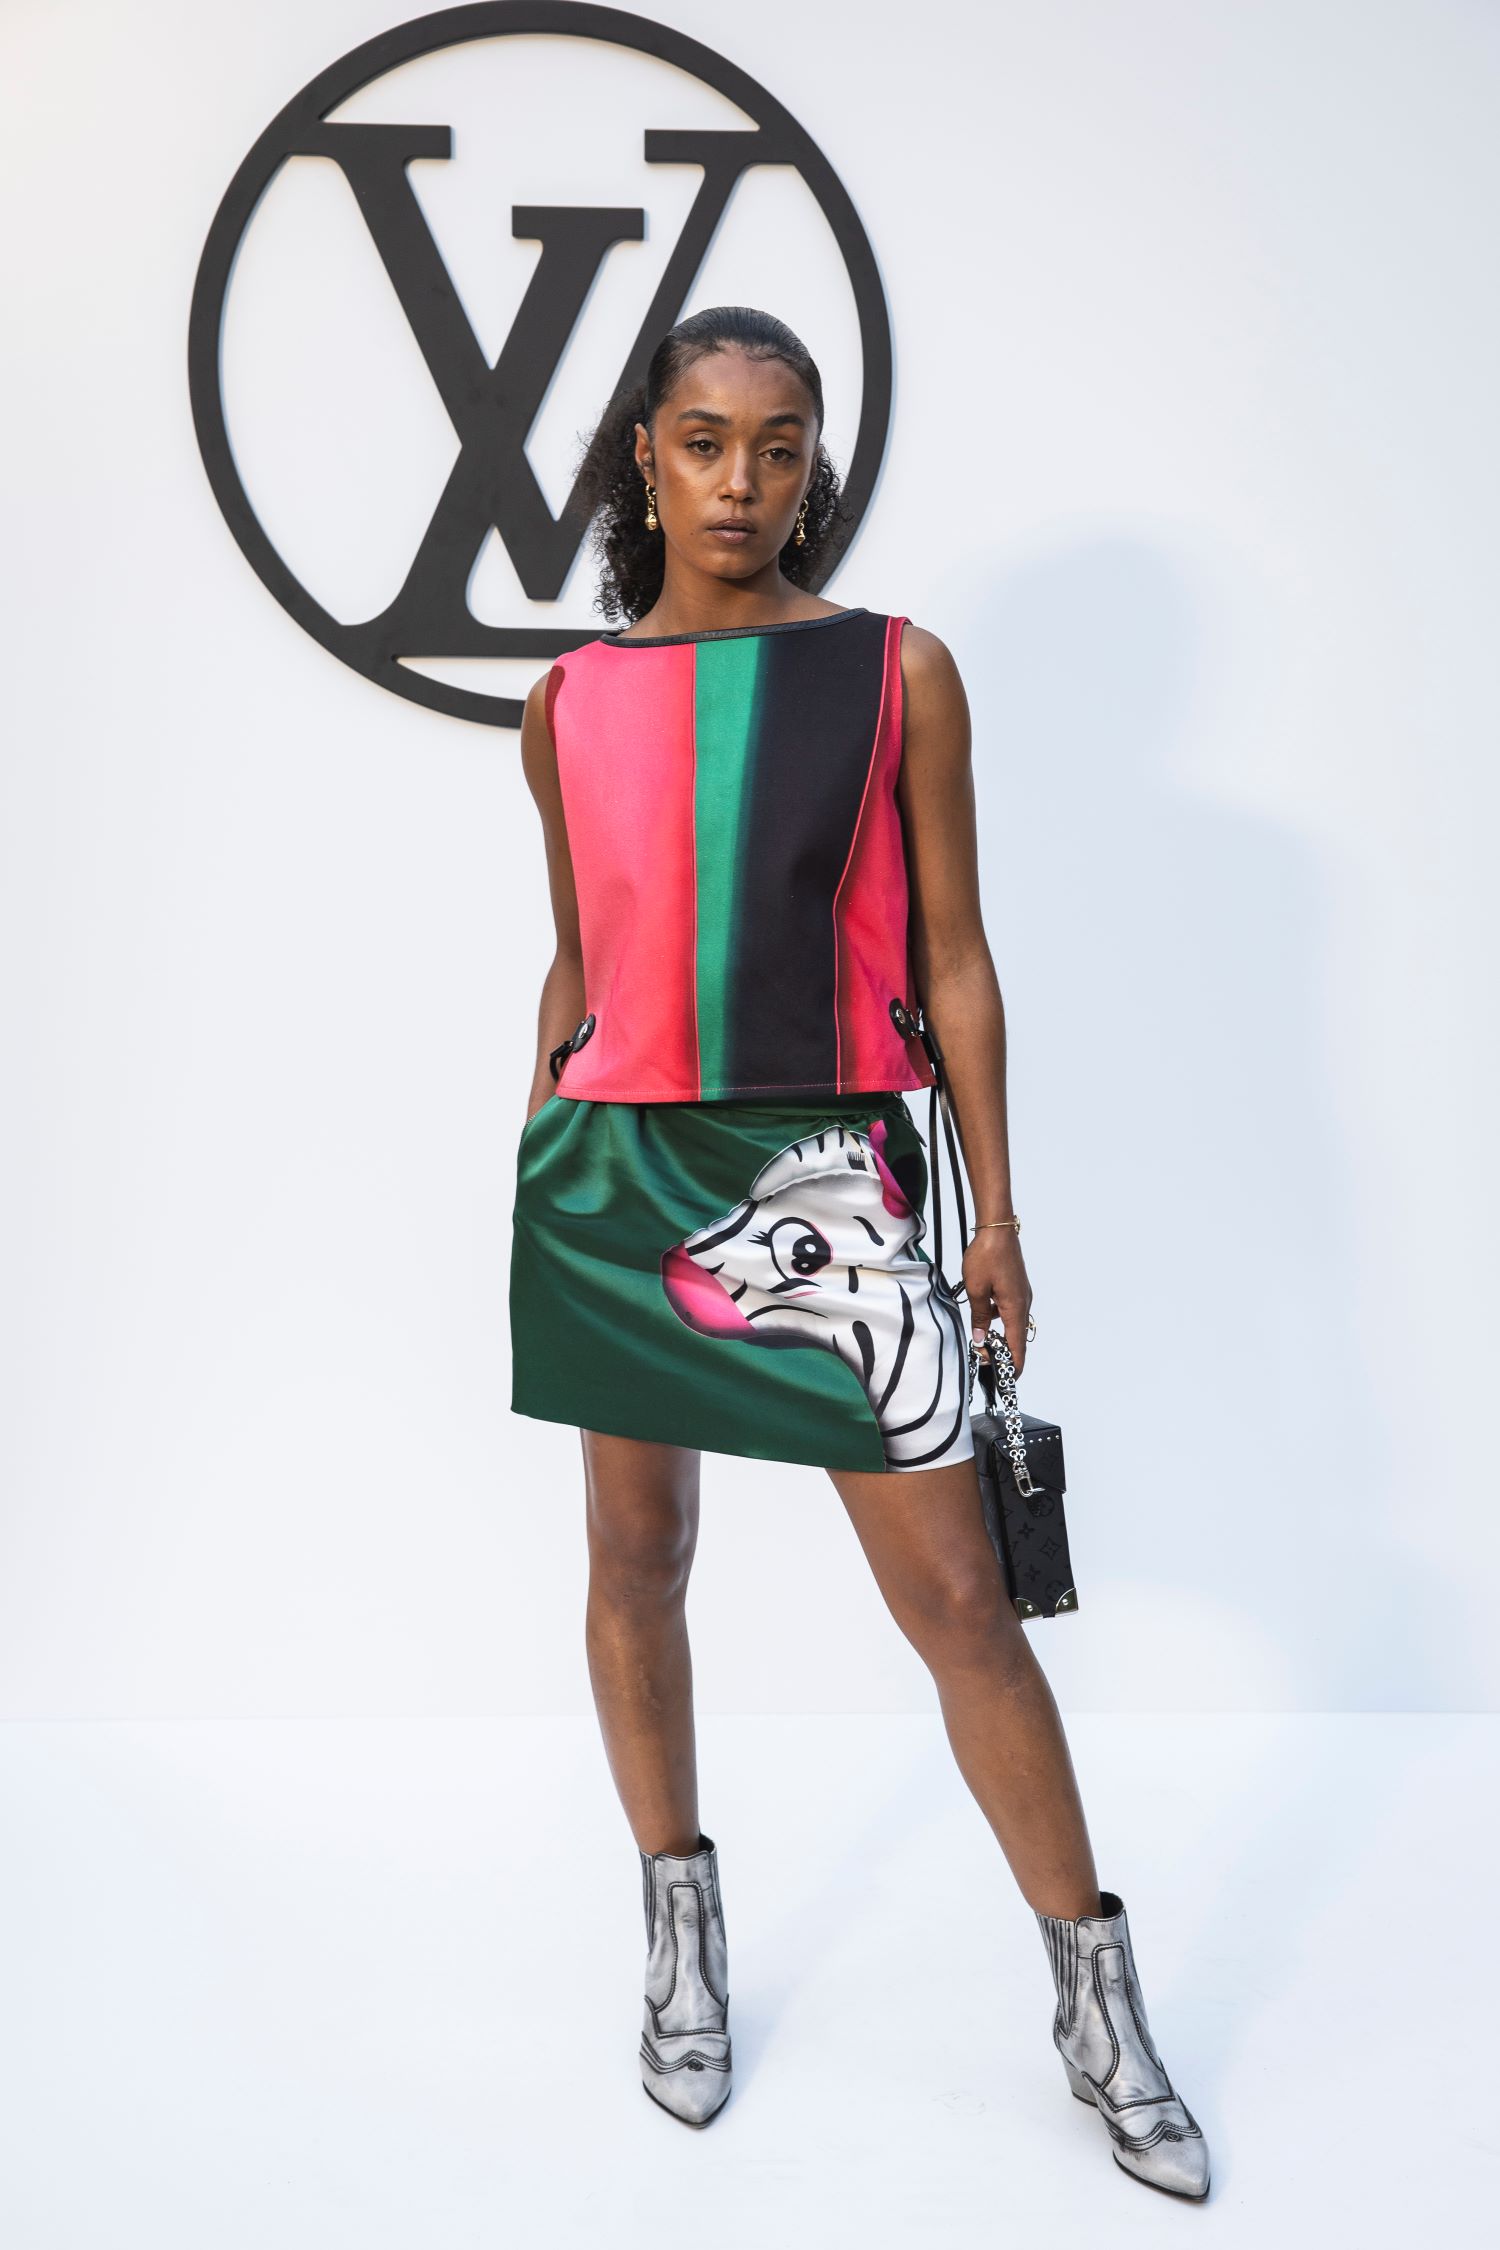  JASMINE JOBSON attending the Cruise 2025 Fashion Show by Louis Vuitton in Barcelona | CRUISE 2025 FASHION SHOW COLLECTION © Louis Vuitton – All rights reserved | Courtesy of Gnazzo Group.